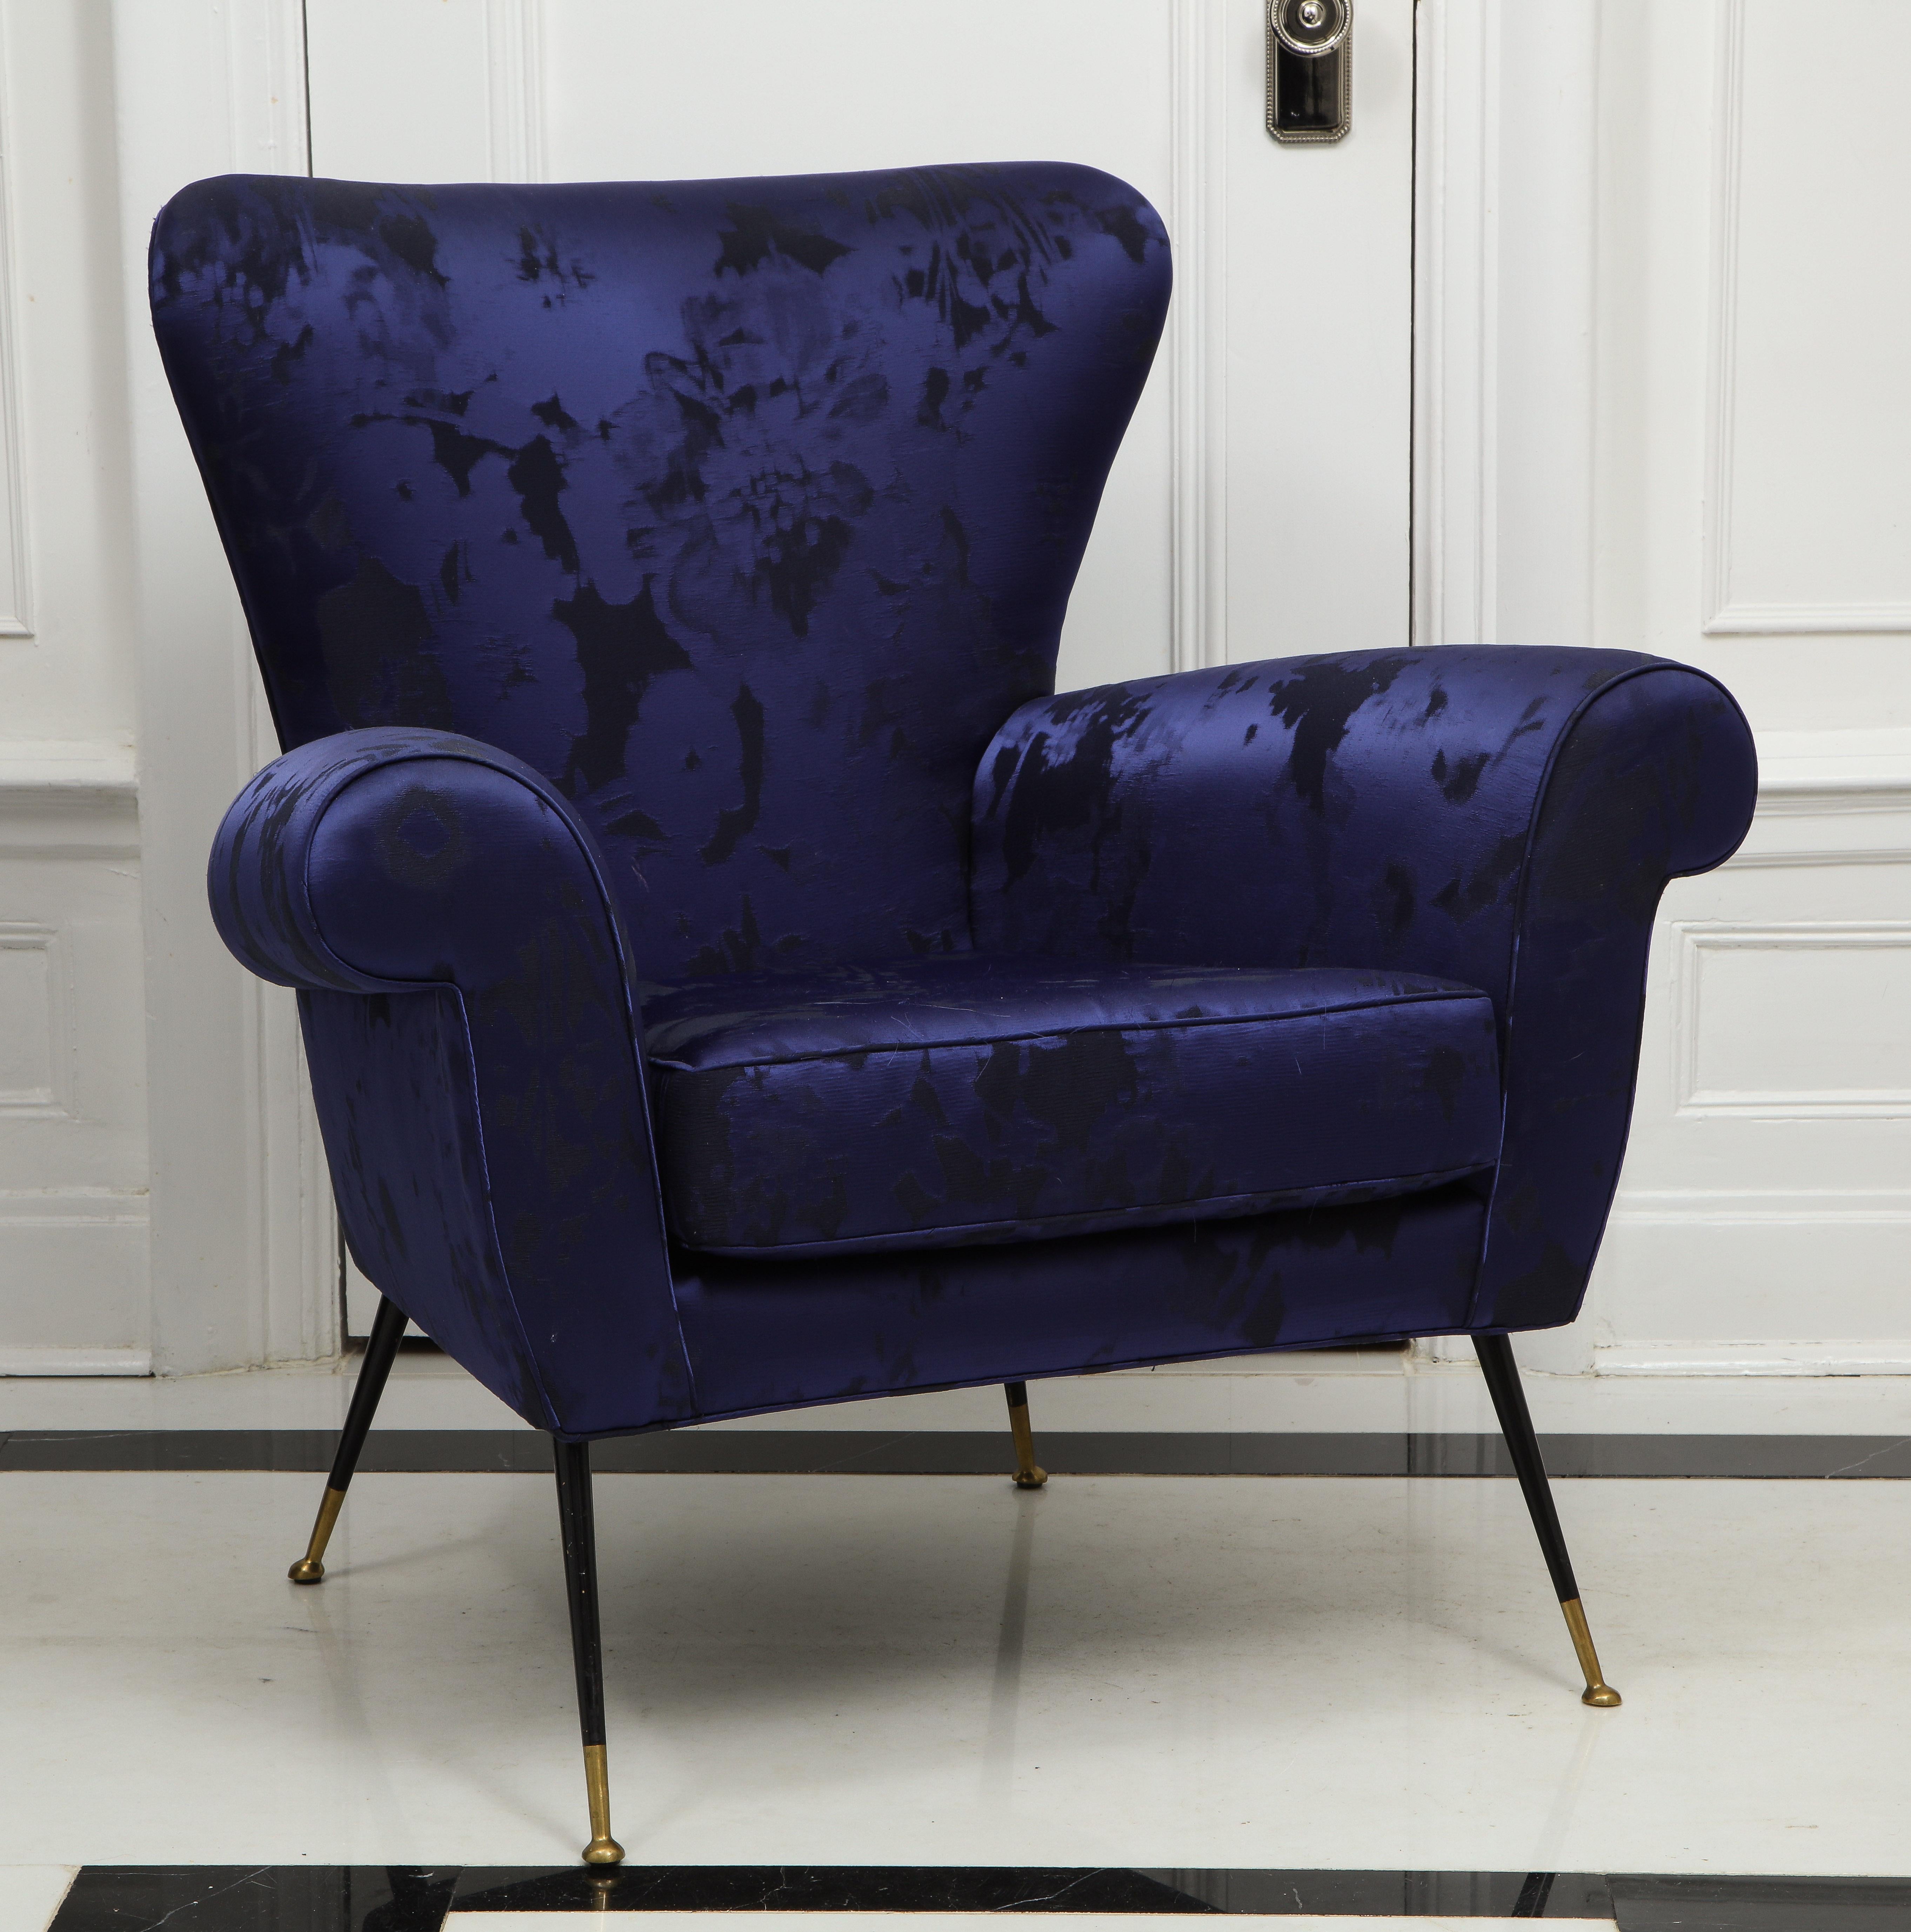 Pair of Vintage Gigi Radice Italian Armchairs in Ultramarine Upholstery In Good Condition For Sale In New York, NY